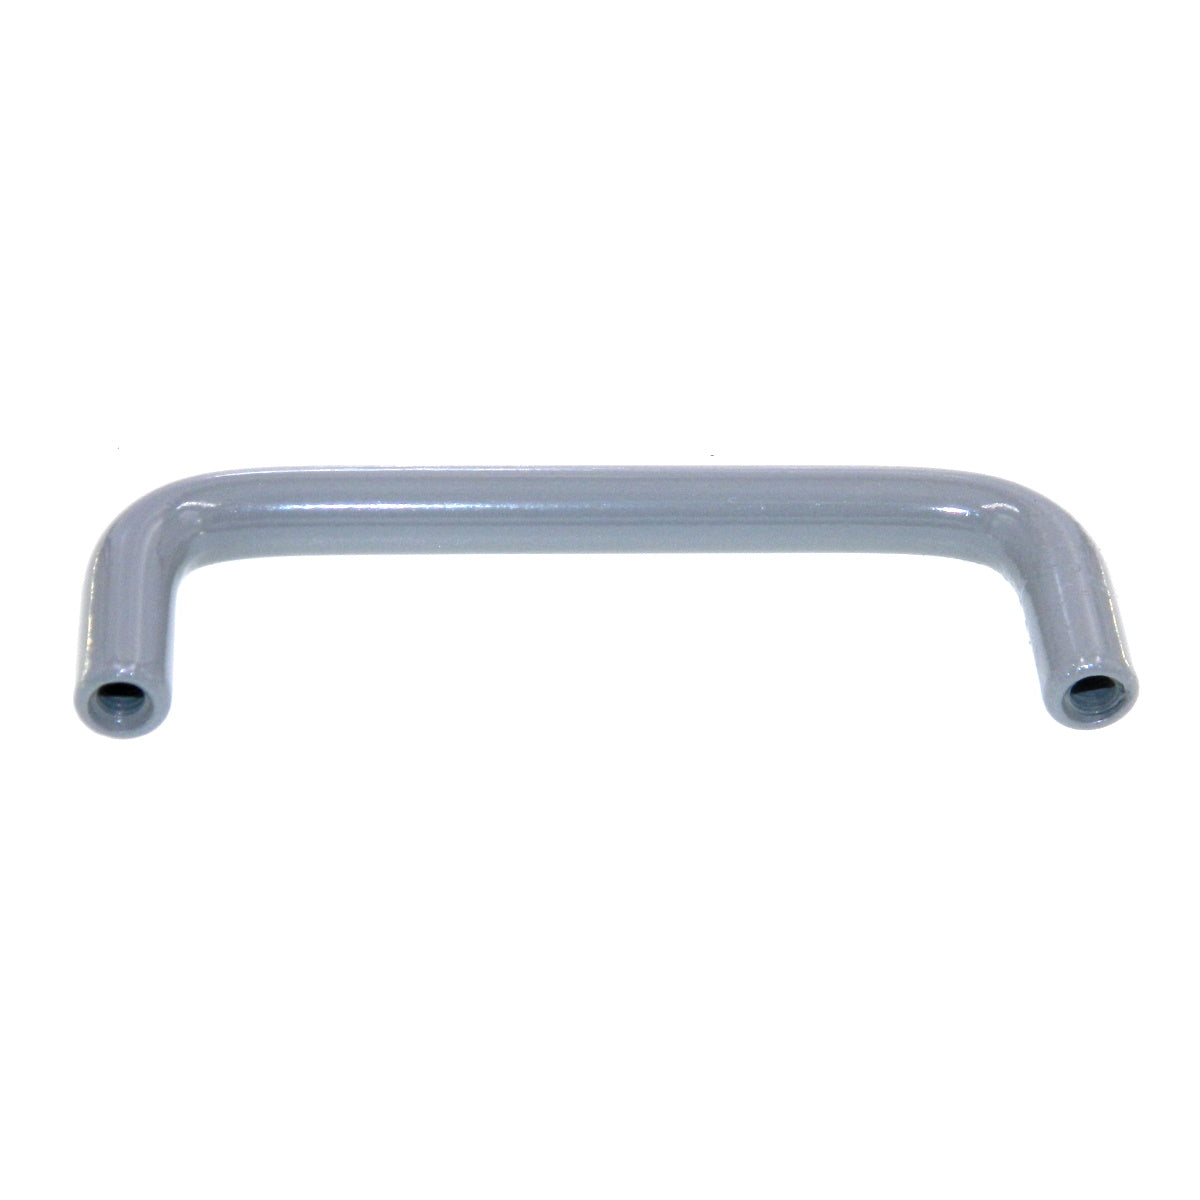 Amerock Wire Pulls Gray 3" Ctr. Wire Pull Cabinet Handle BP865-G